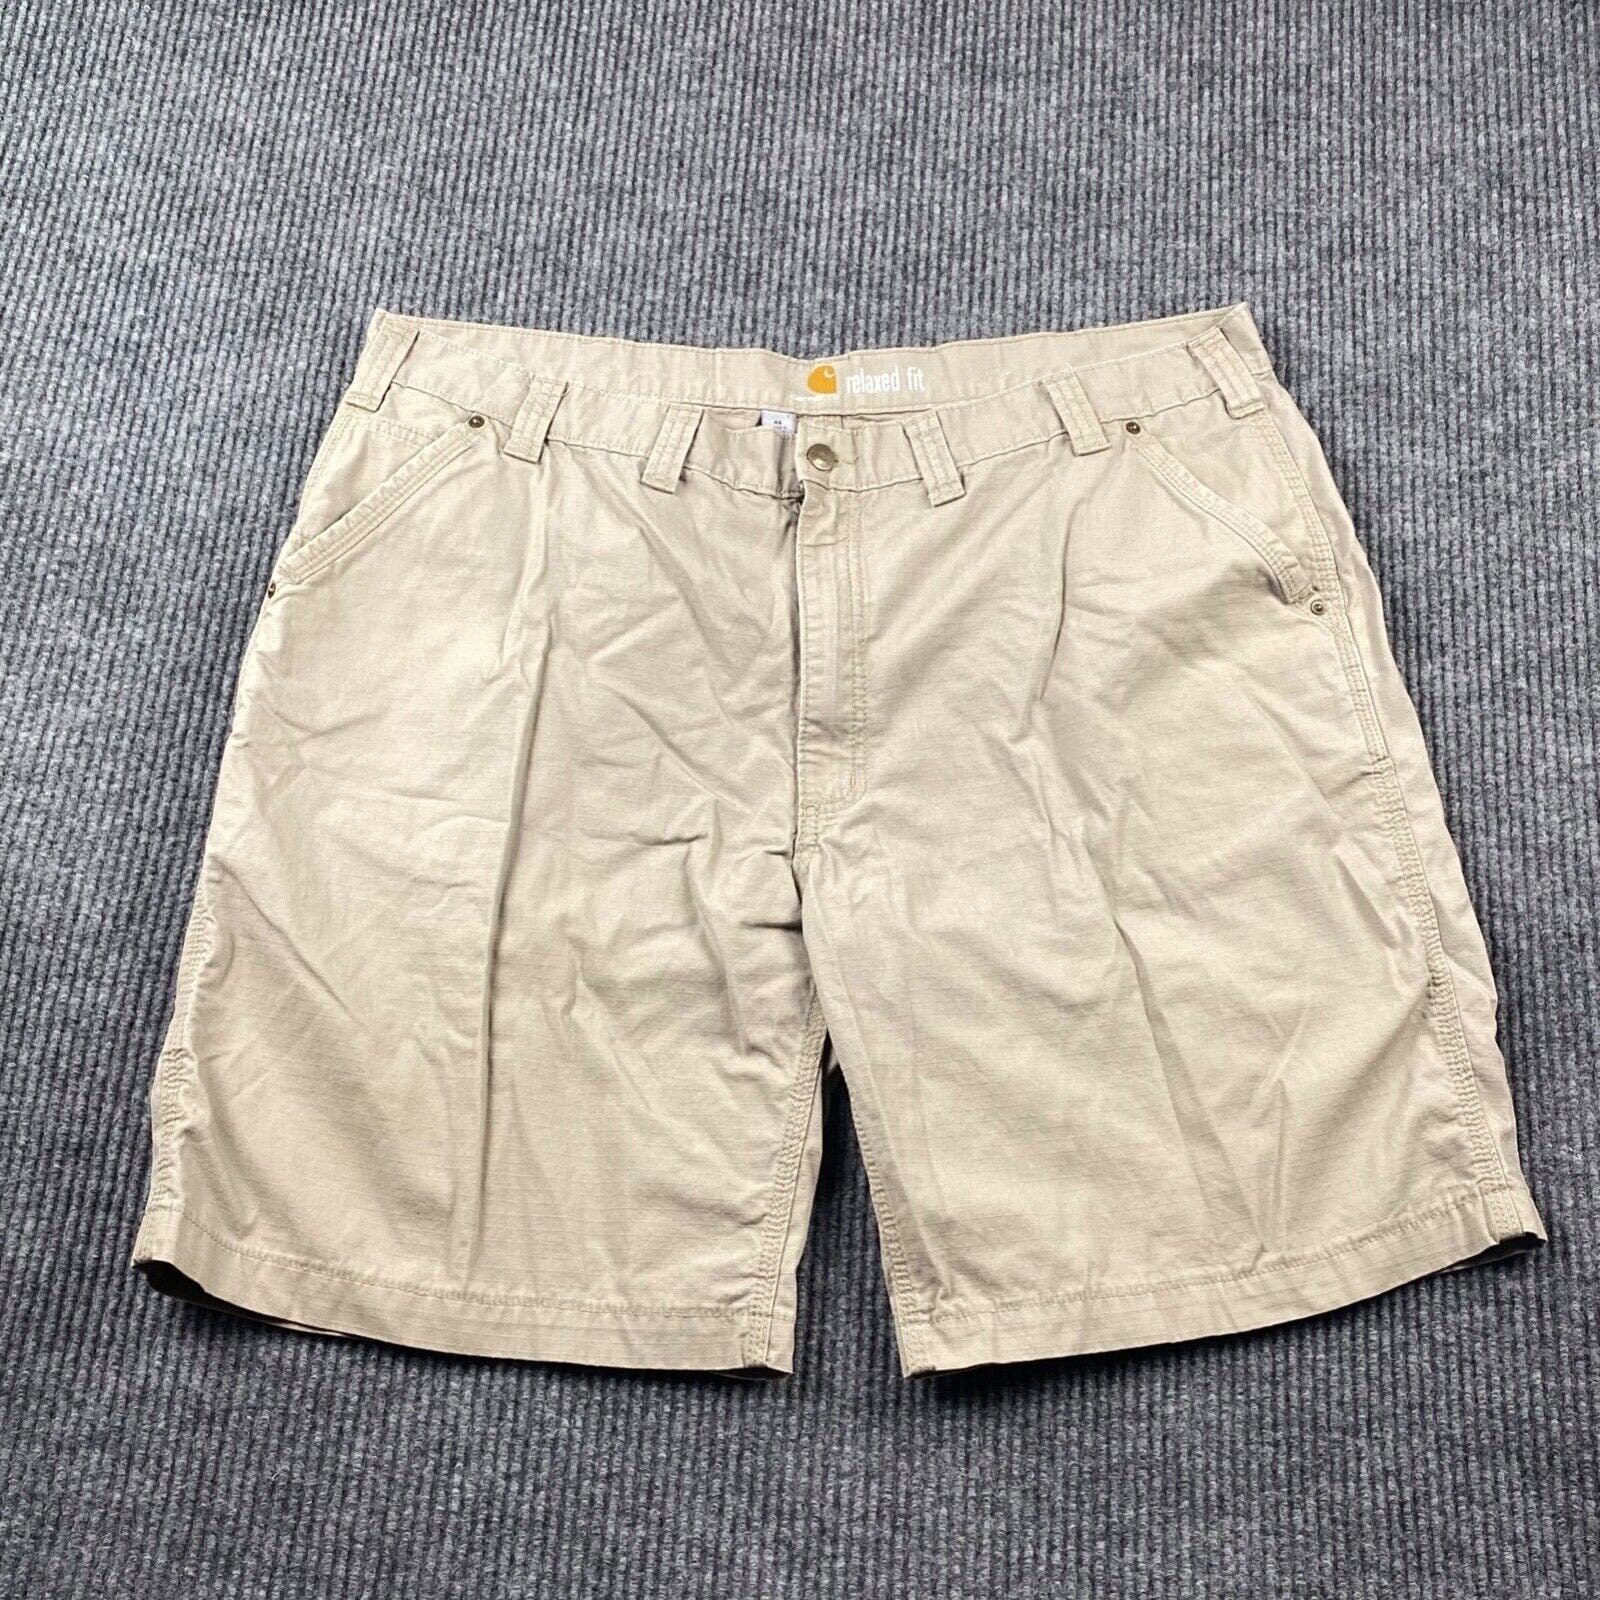 Carhartt Ripstop Shorts Men’s Size 44 Actual 42 Relaxed Fit Beige ioHkH9dms